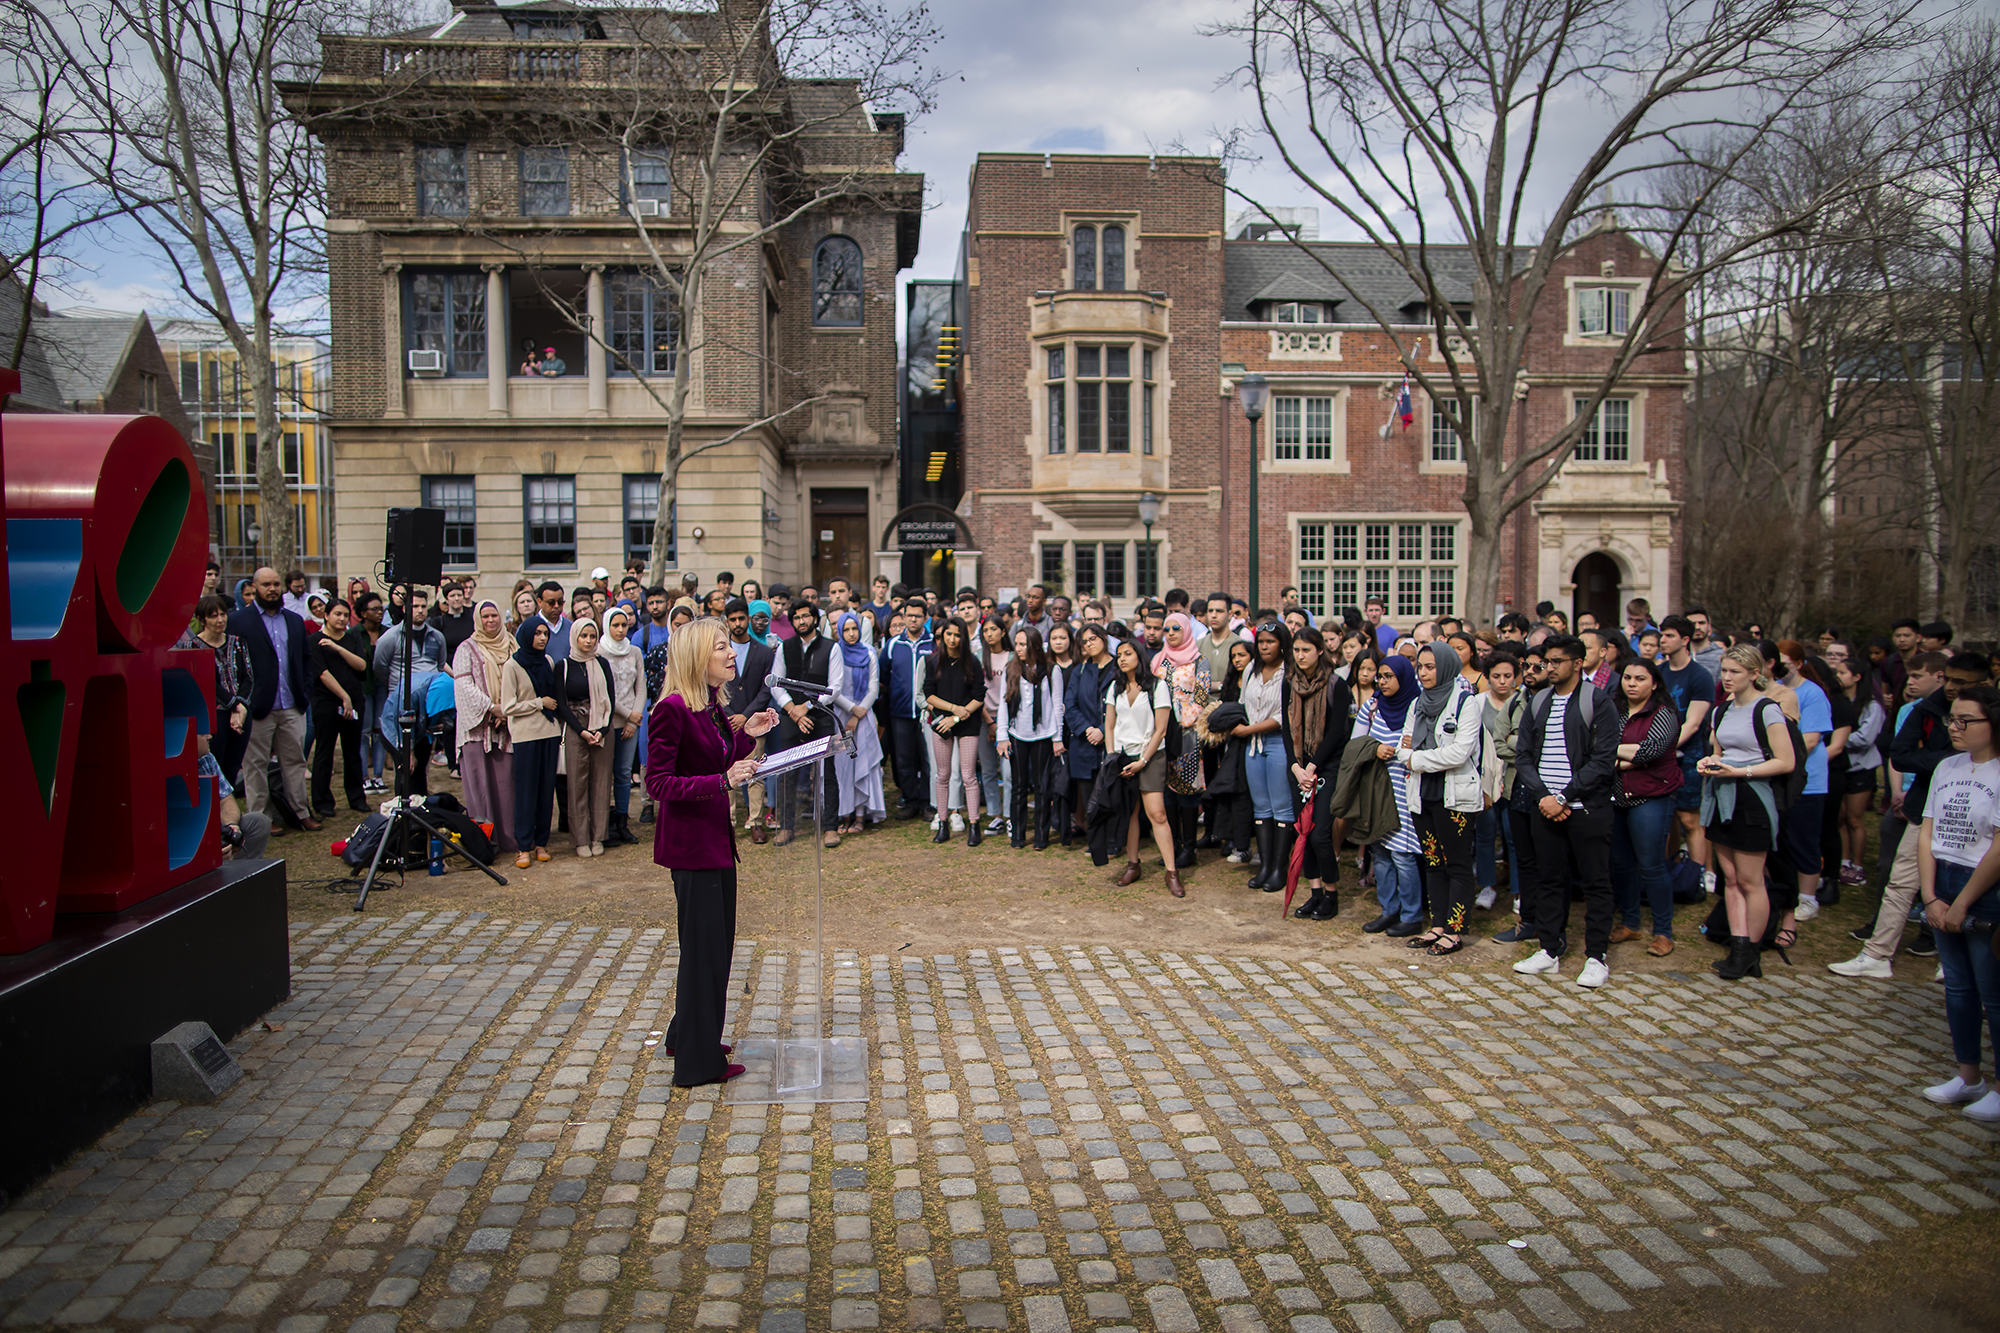 Dr. Gutmann stands and addresses a crowd in front of the LOVE statue on campus outside in daylight